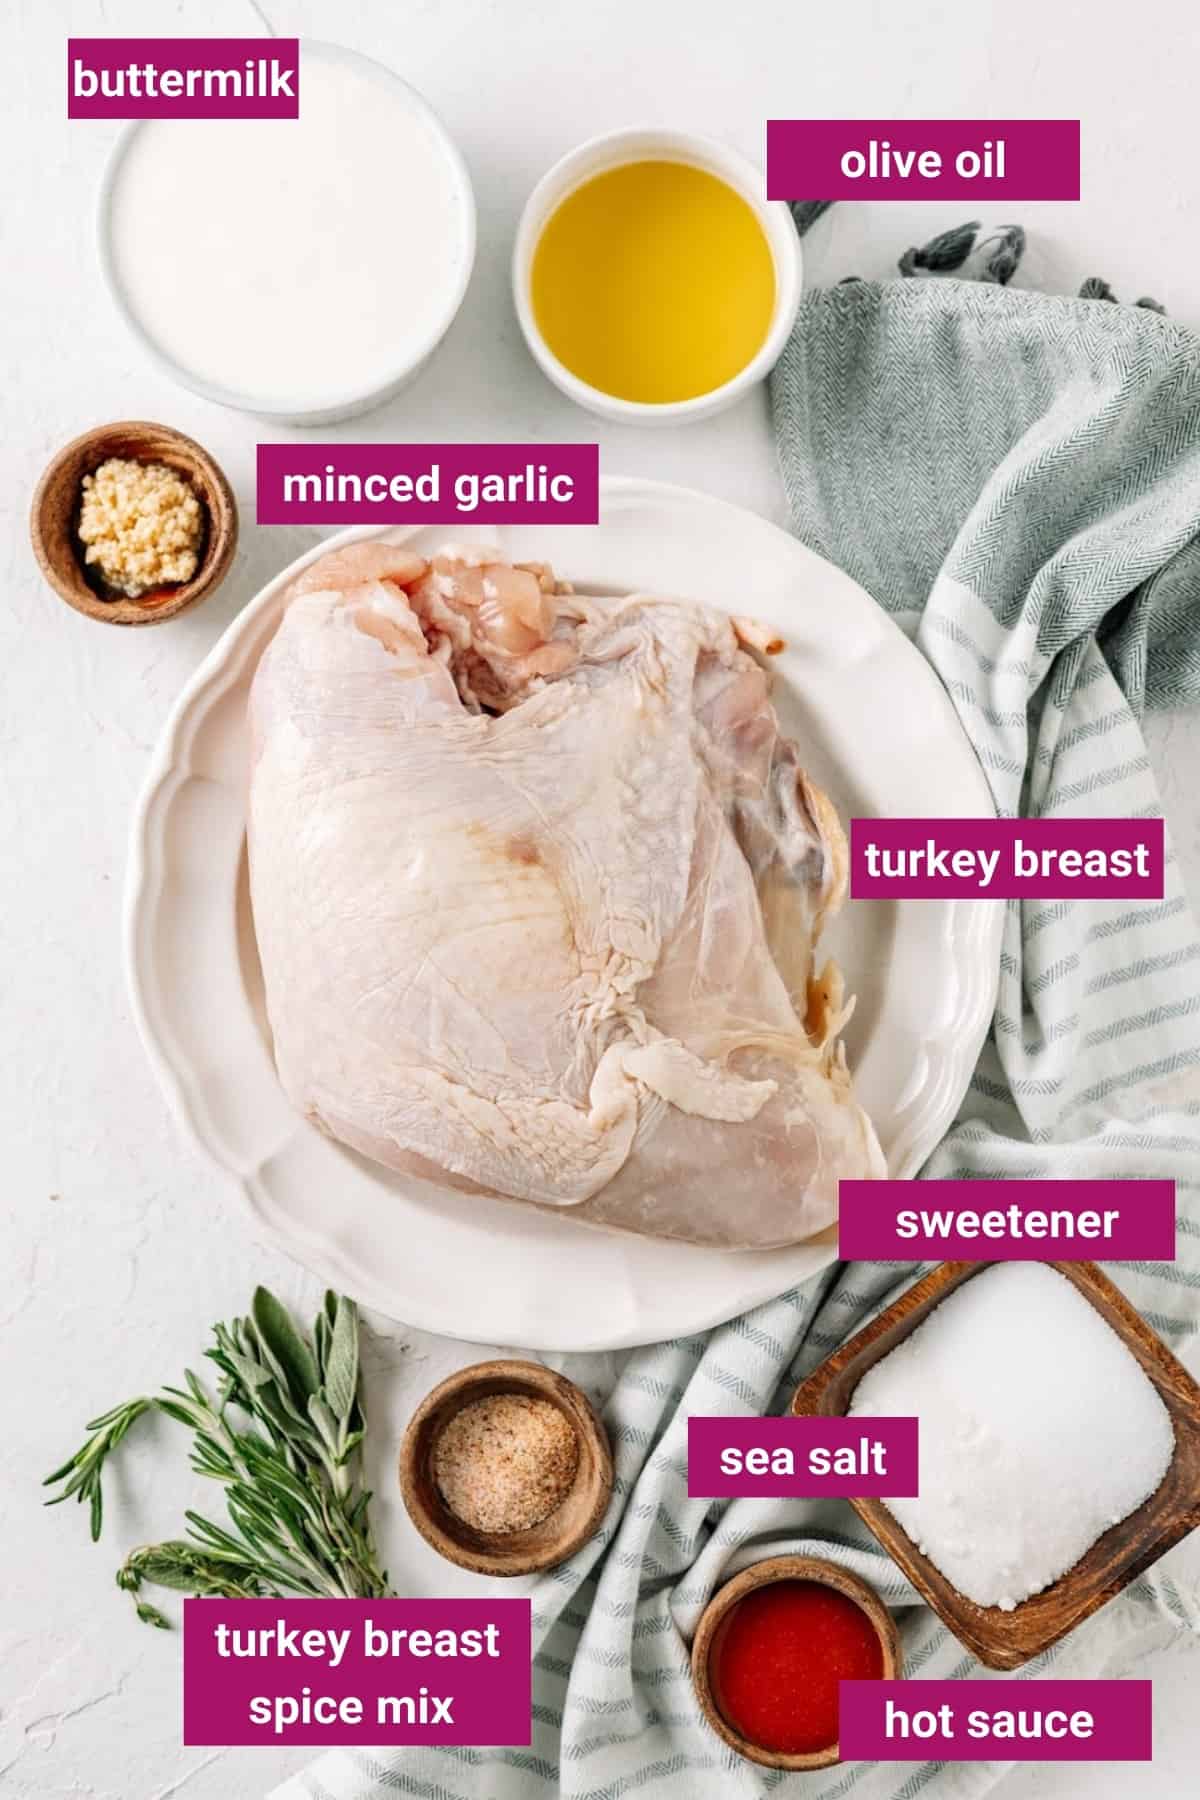 Overhead view of the labeled ingredients for air fryer turkey breasts: turkey breast, minced garlic, buttermilk, olive oil, sweetener, sea salt, hot sauce, and turkey breast spice mix